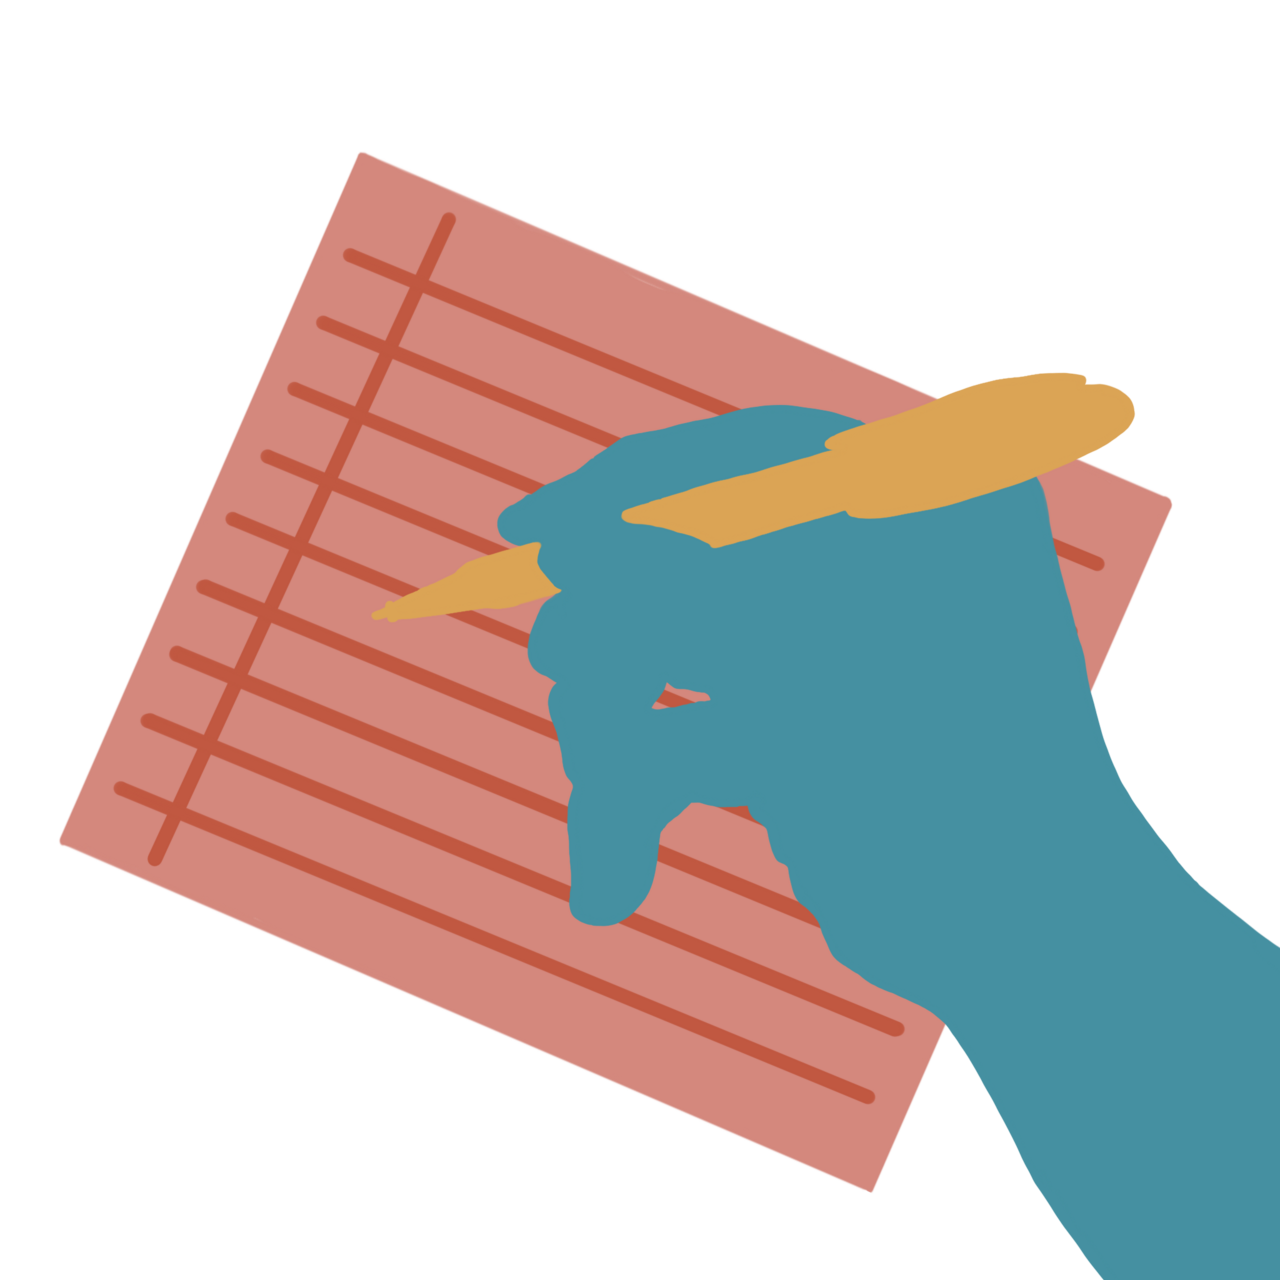 An illustration of a hand holding a pen, writing on lines paper